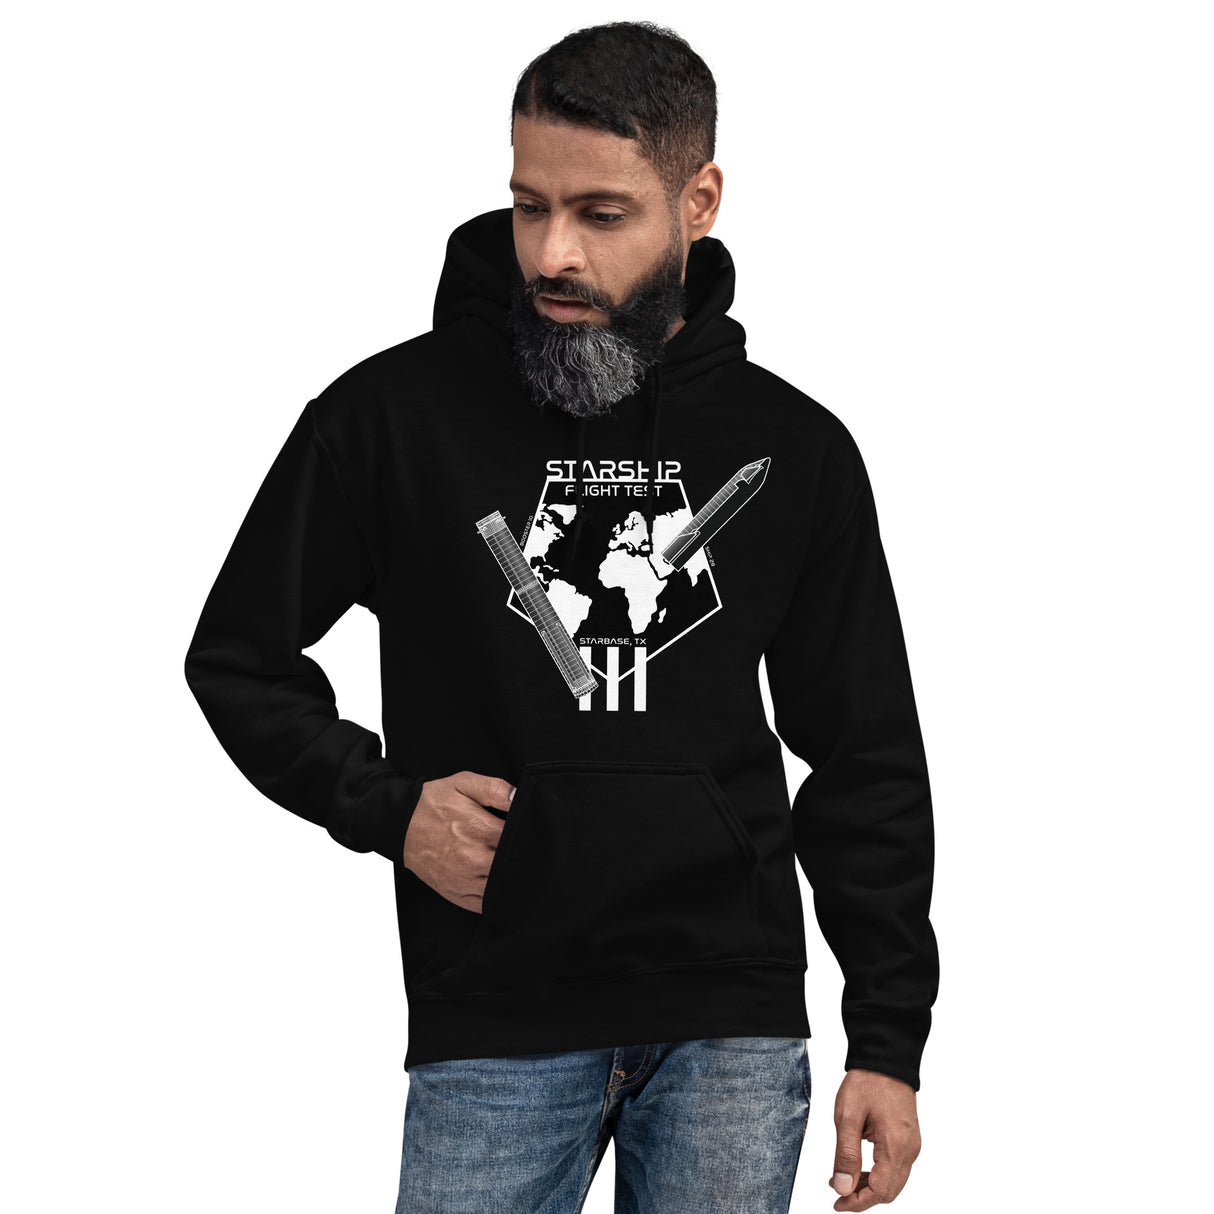 LIMITED! Starship IFT-3 Mission Hoodie